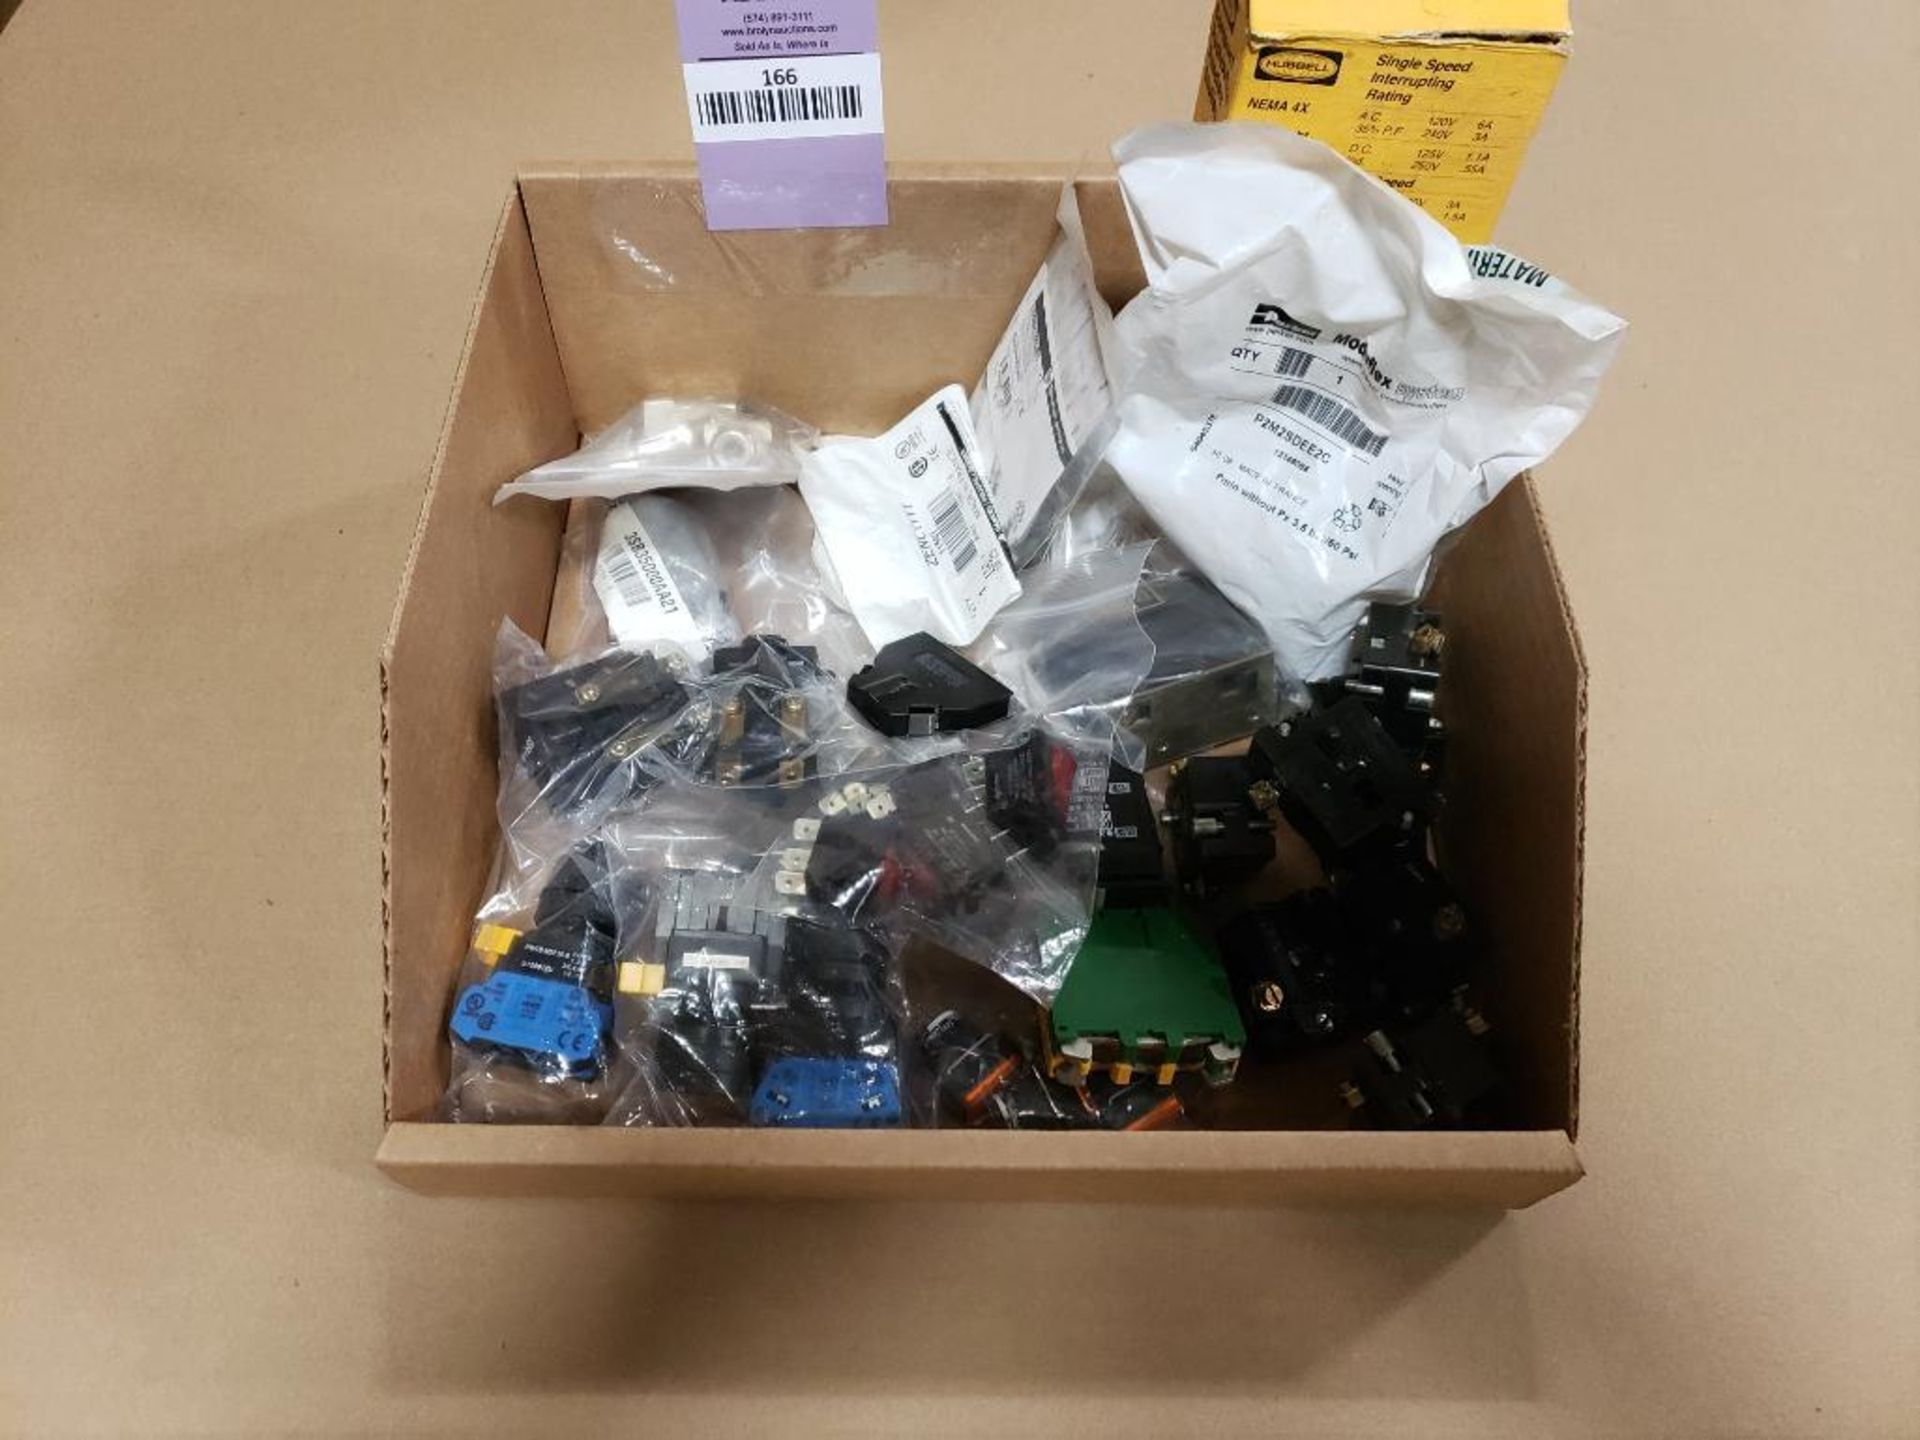 Assorted electrical button parts.